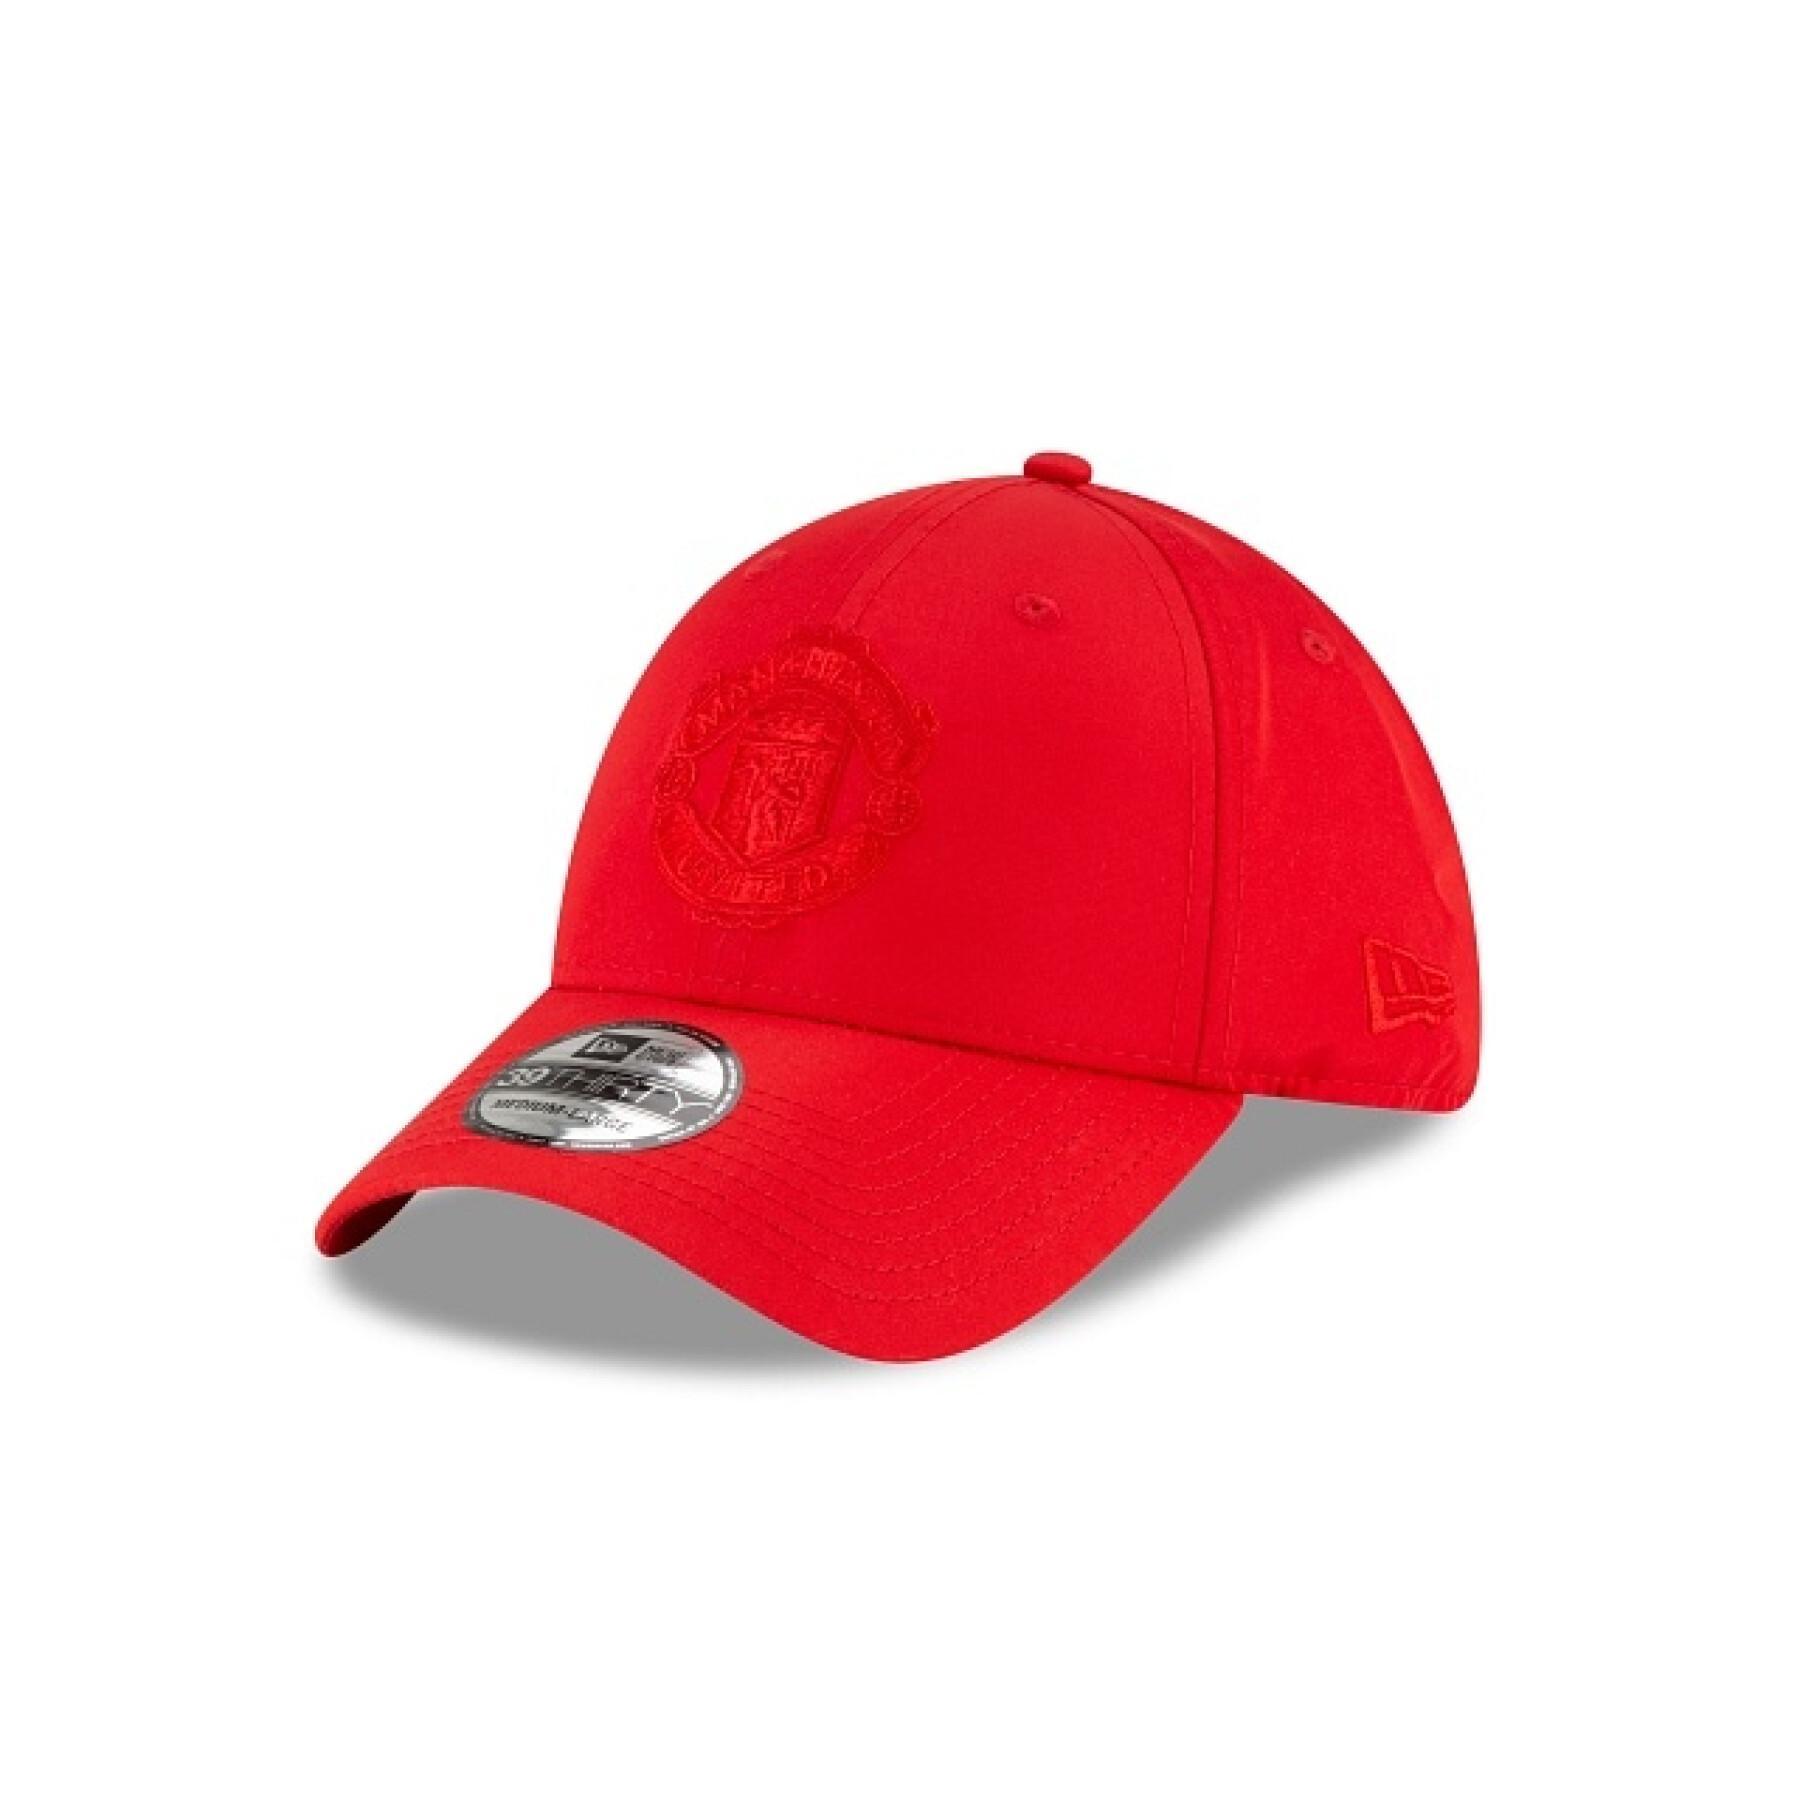 Casquette 39thirty Manchester United 2021/22